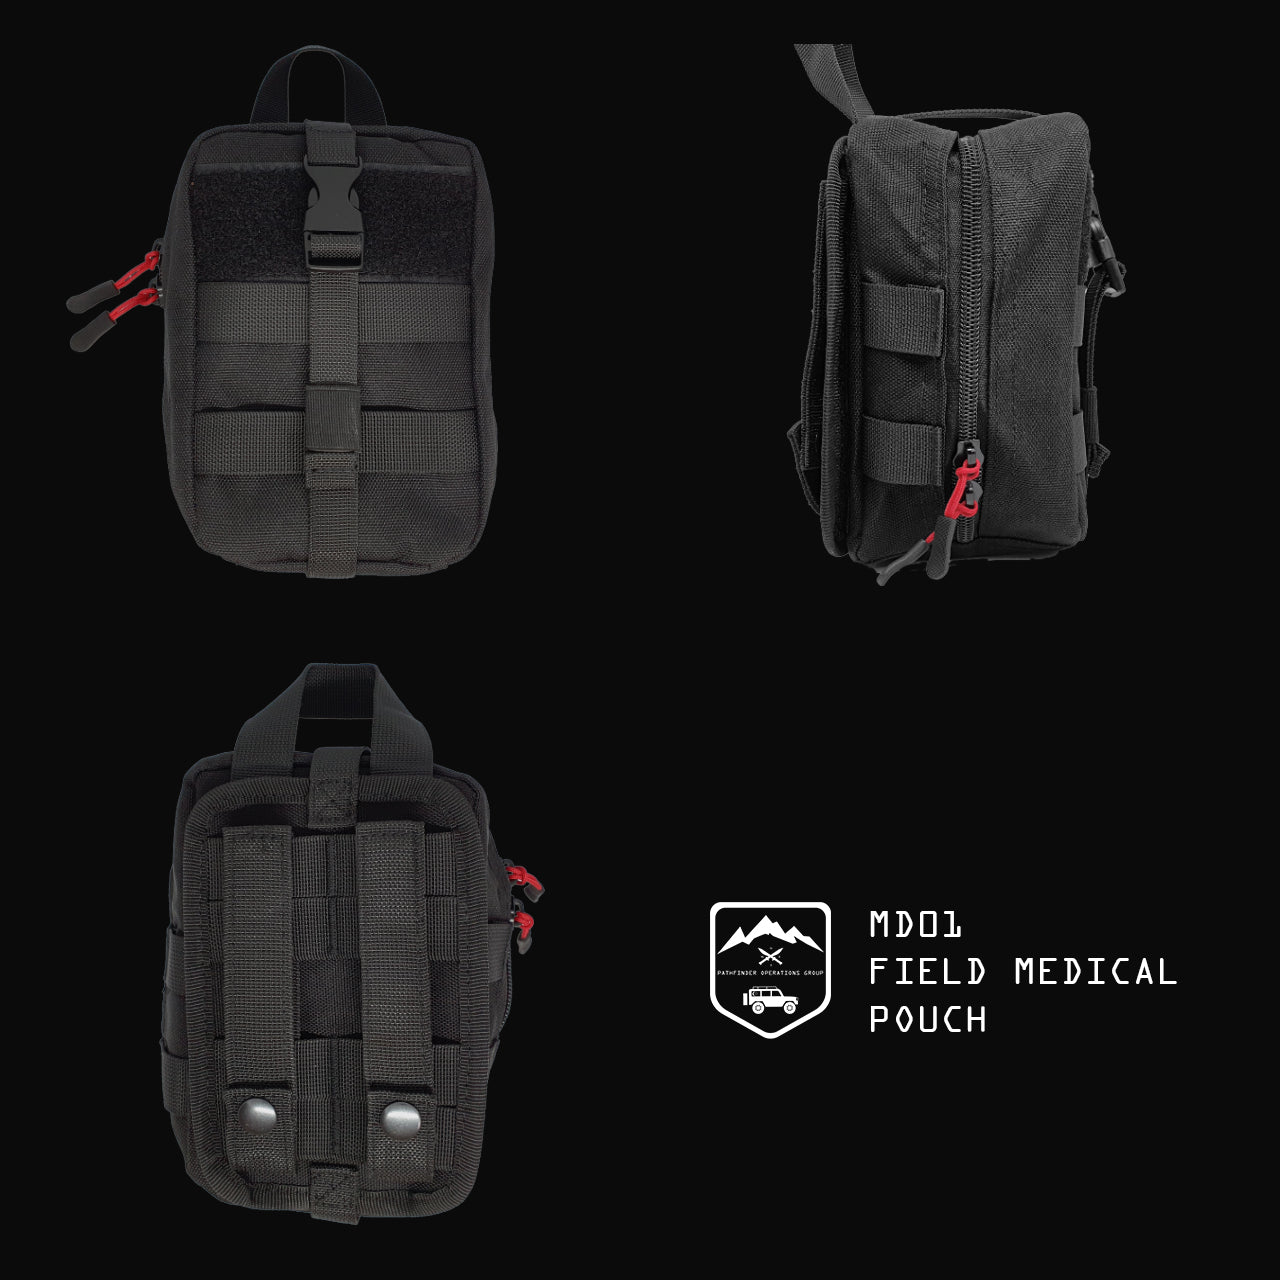 MD01 Detachable Medical Pouch